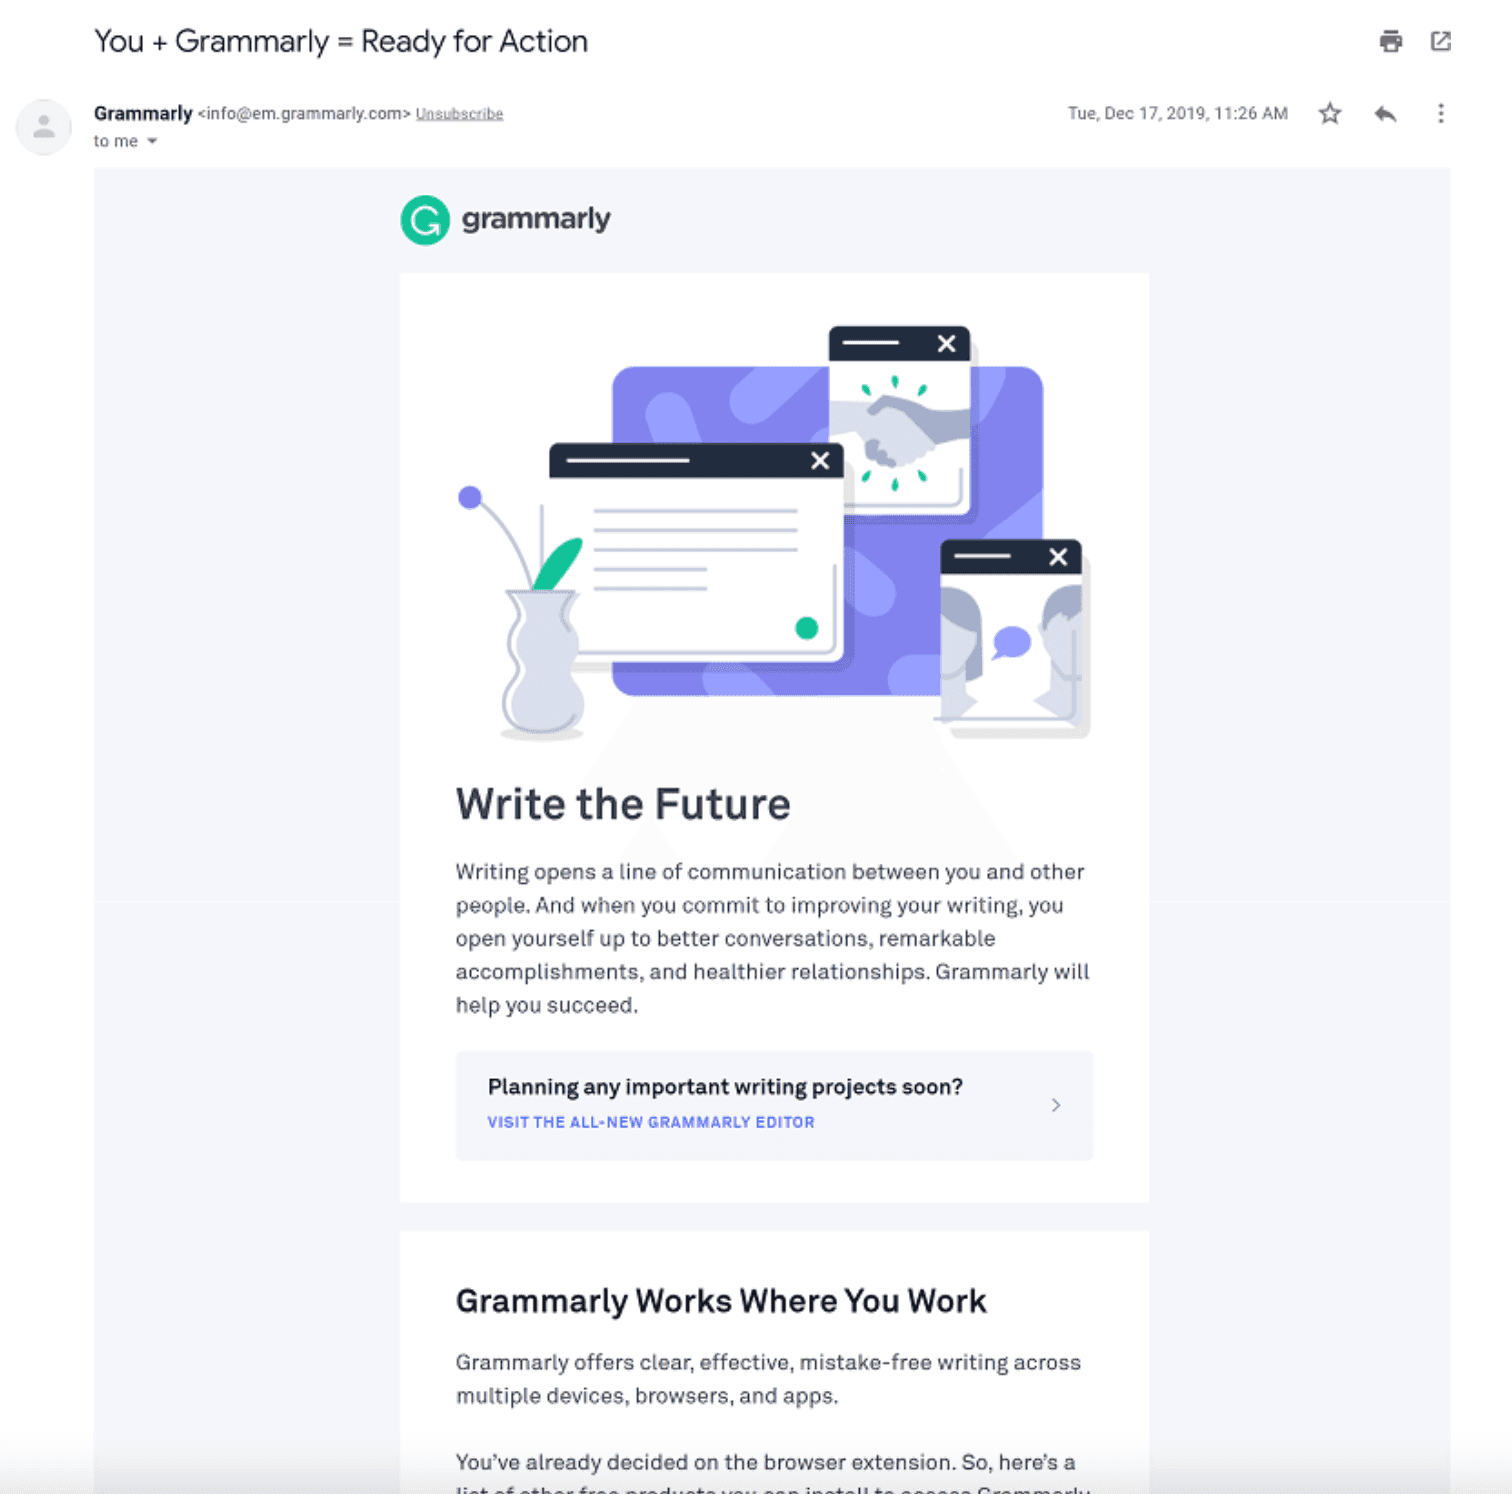 Screenshot of email from Grammarly